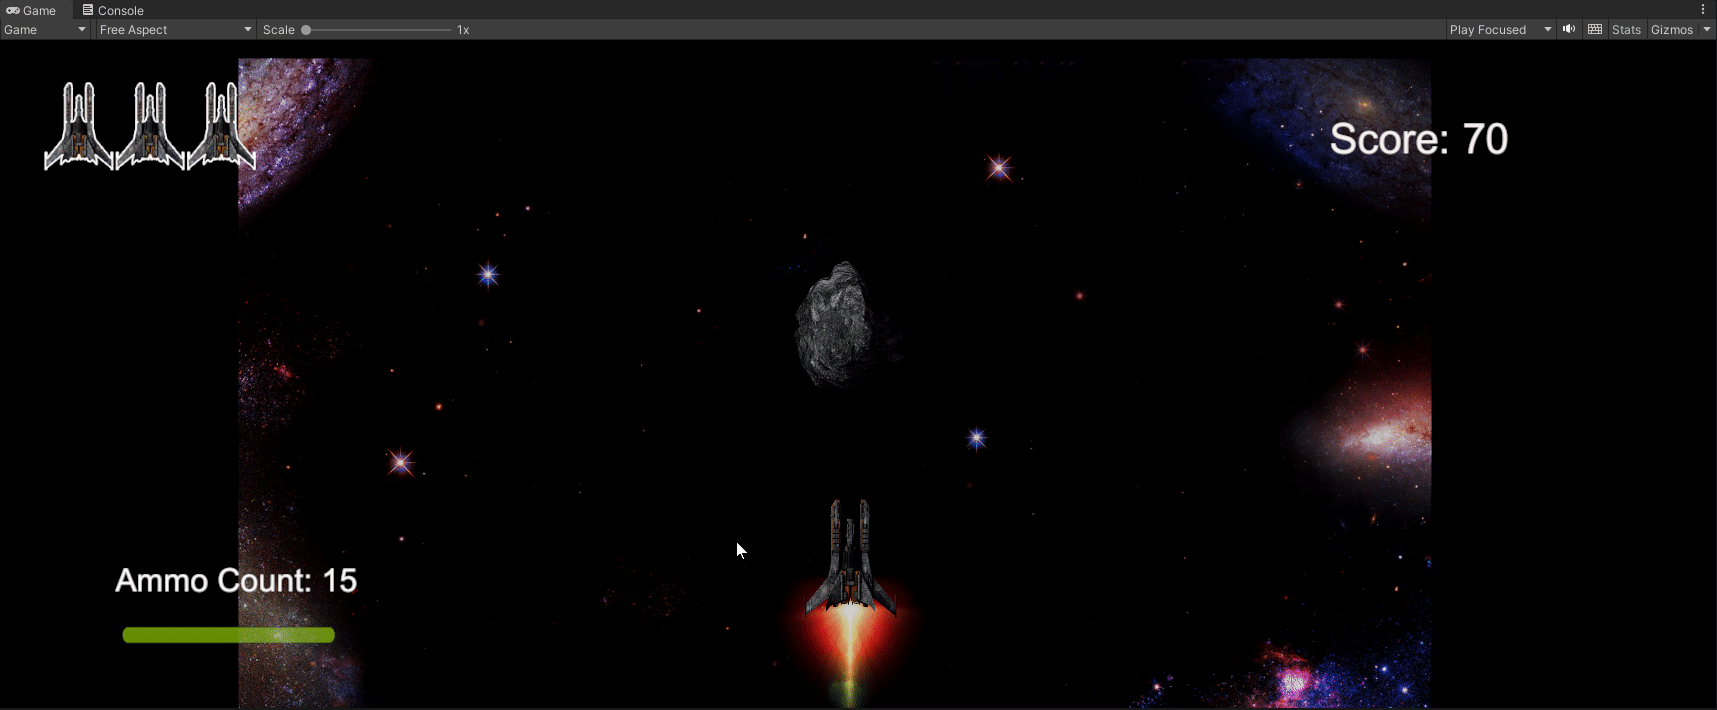 Gif of 2D space shooter game showing the enemyies moving downscreen diagonally.